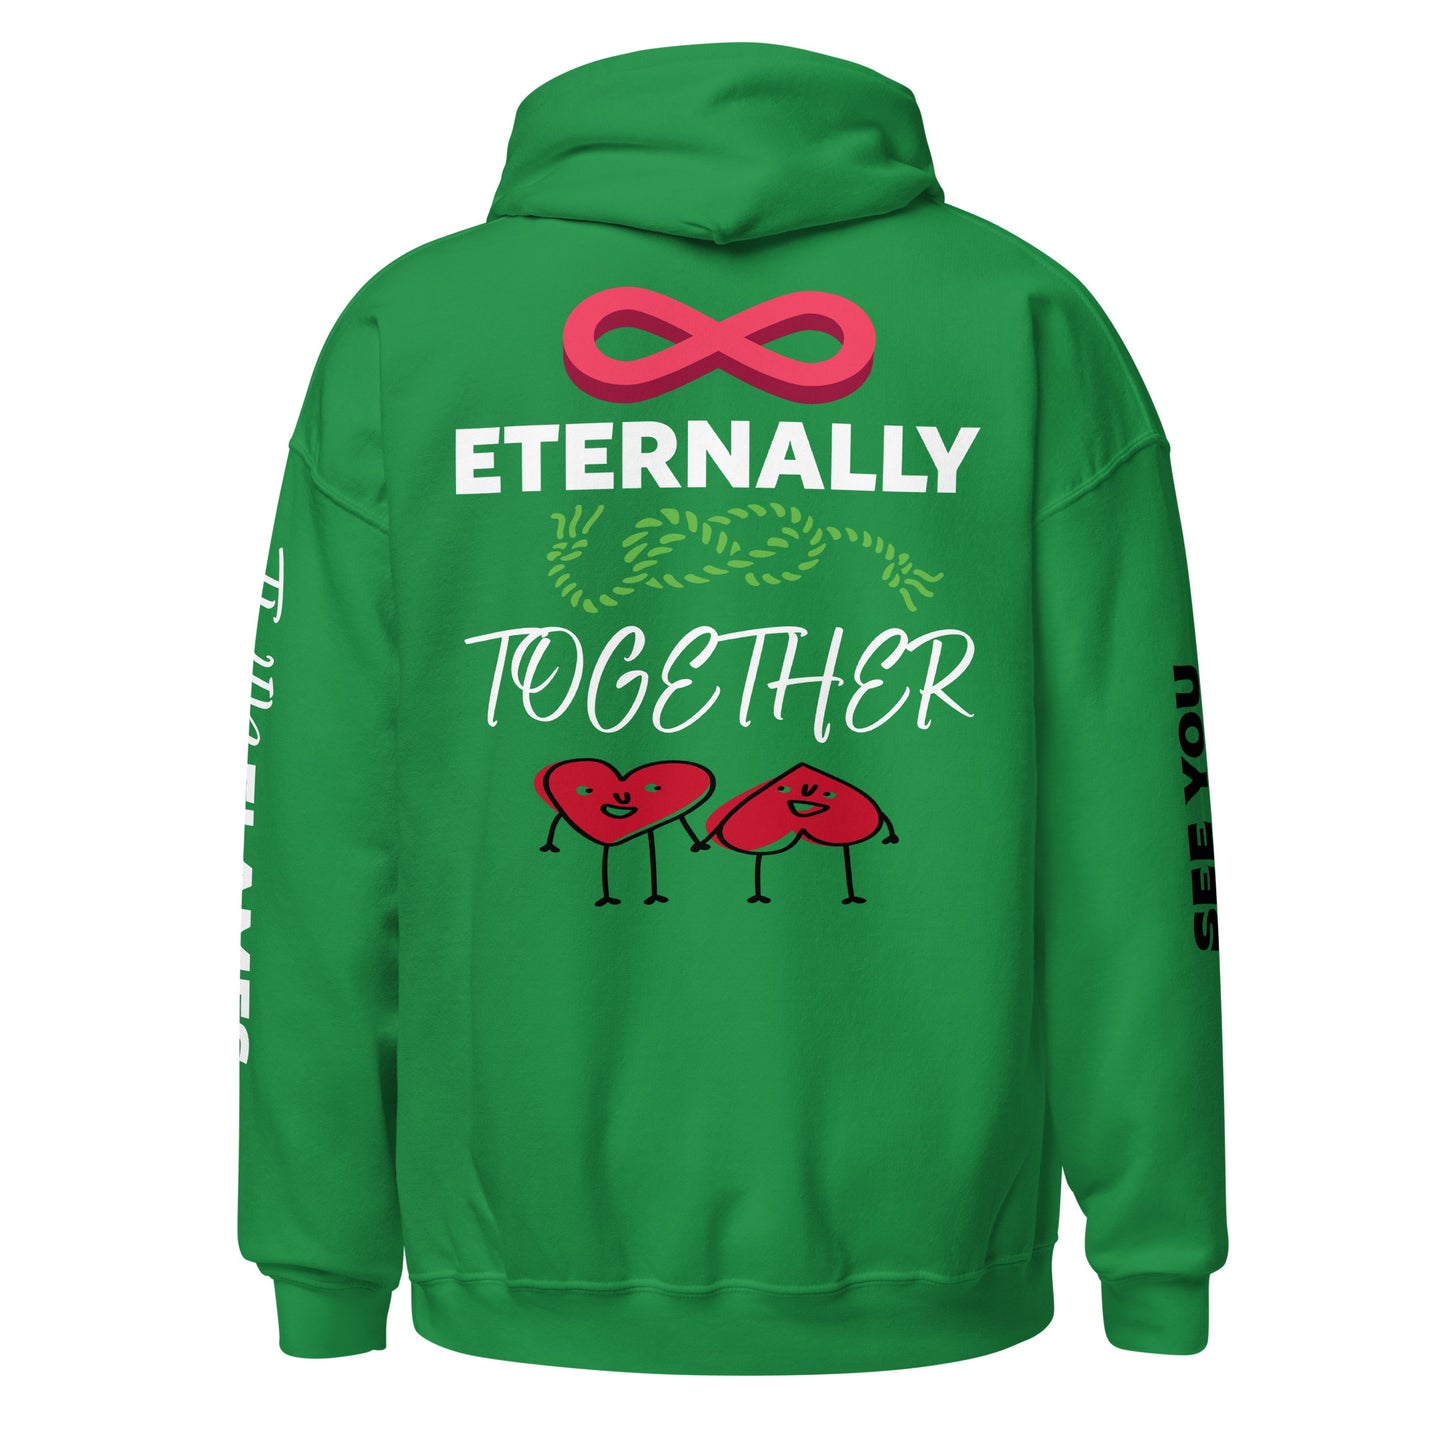 Green hoodies with quotes. Hoodies with text on the back "ETERNALLY TOGETHER." White, black, and green hoodie with infinity symbol and red hearts. Back view of Irish green unisex hoodie with a pink/red infinity symbol, the word "Eternally" written in white, a green rope tied in an infinity knot, the word "TOGETHER" written in white, two red hearts in love holding hands, and a double-lined hood. Sizes Small, Medium, Large, Extra Large, 2XL, and 3XL. JAMILLIAH'S WISDOM IS TIMELESS SHOP - wisdomistimeless.com.